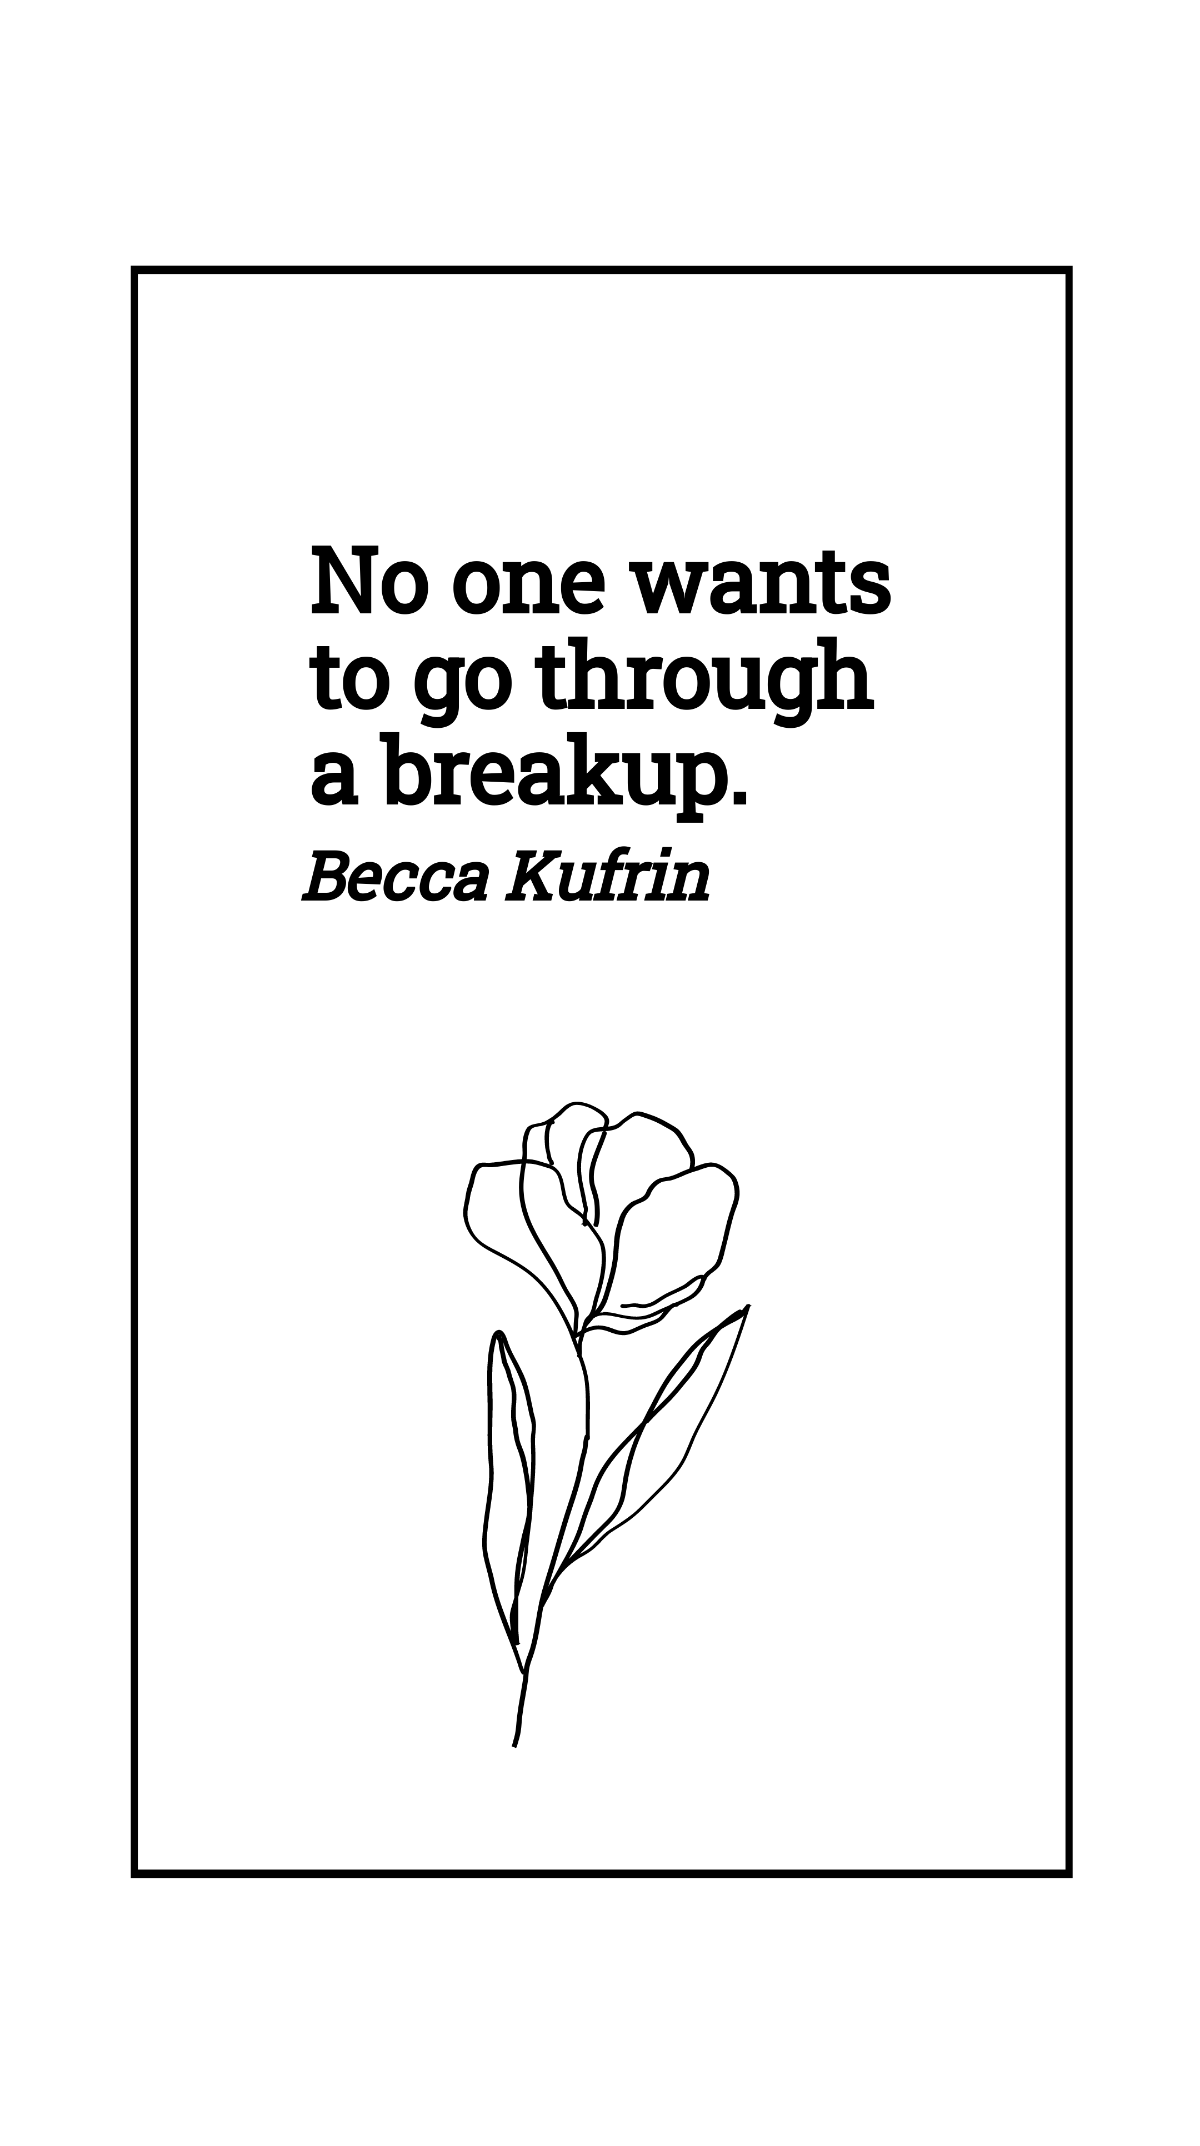 Becca Kufrin - No one wants to go through a breakup.